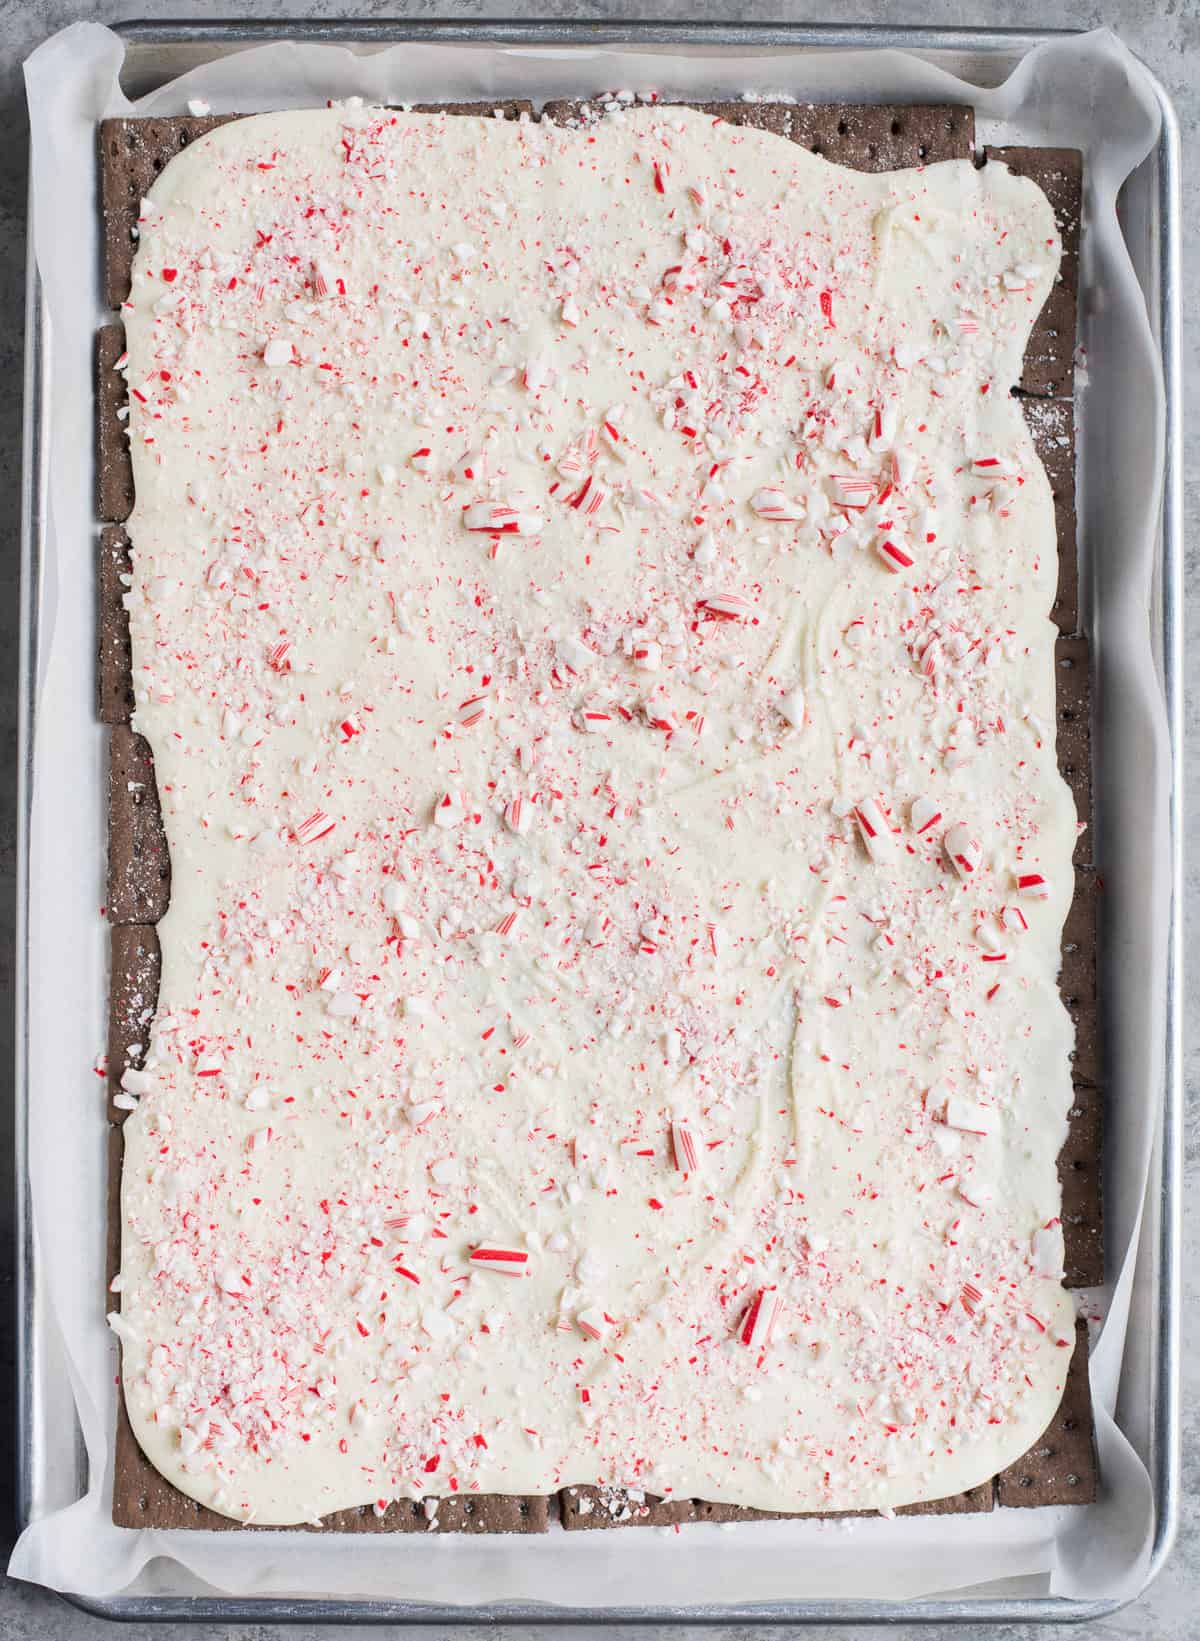 melted white chocolate and crushed candy canes spread over chocolate graham crackers